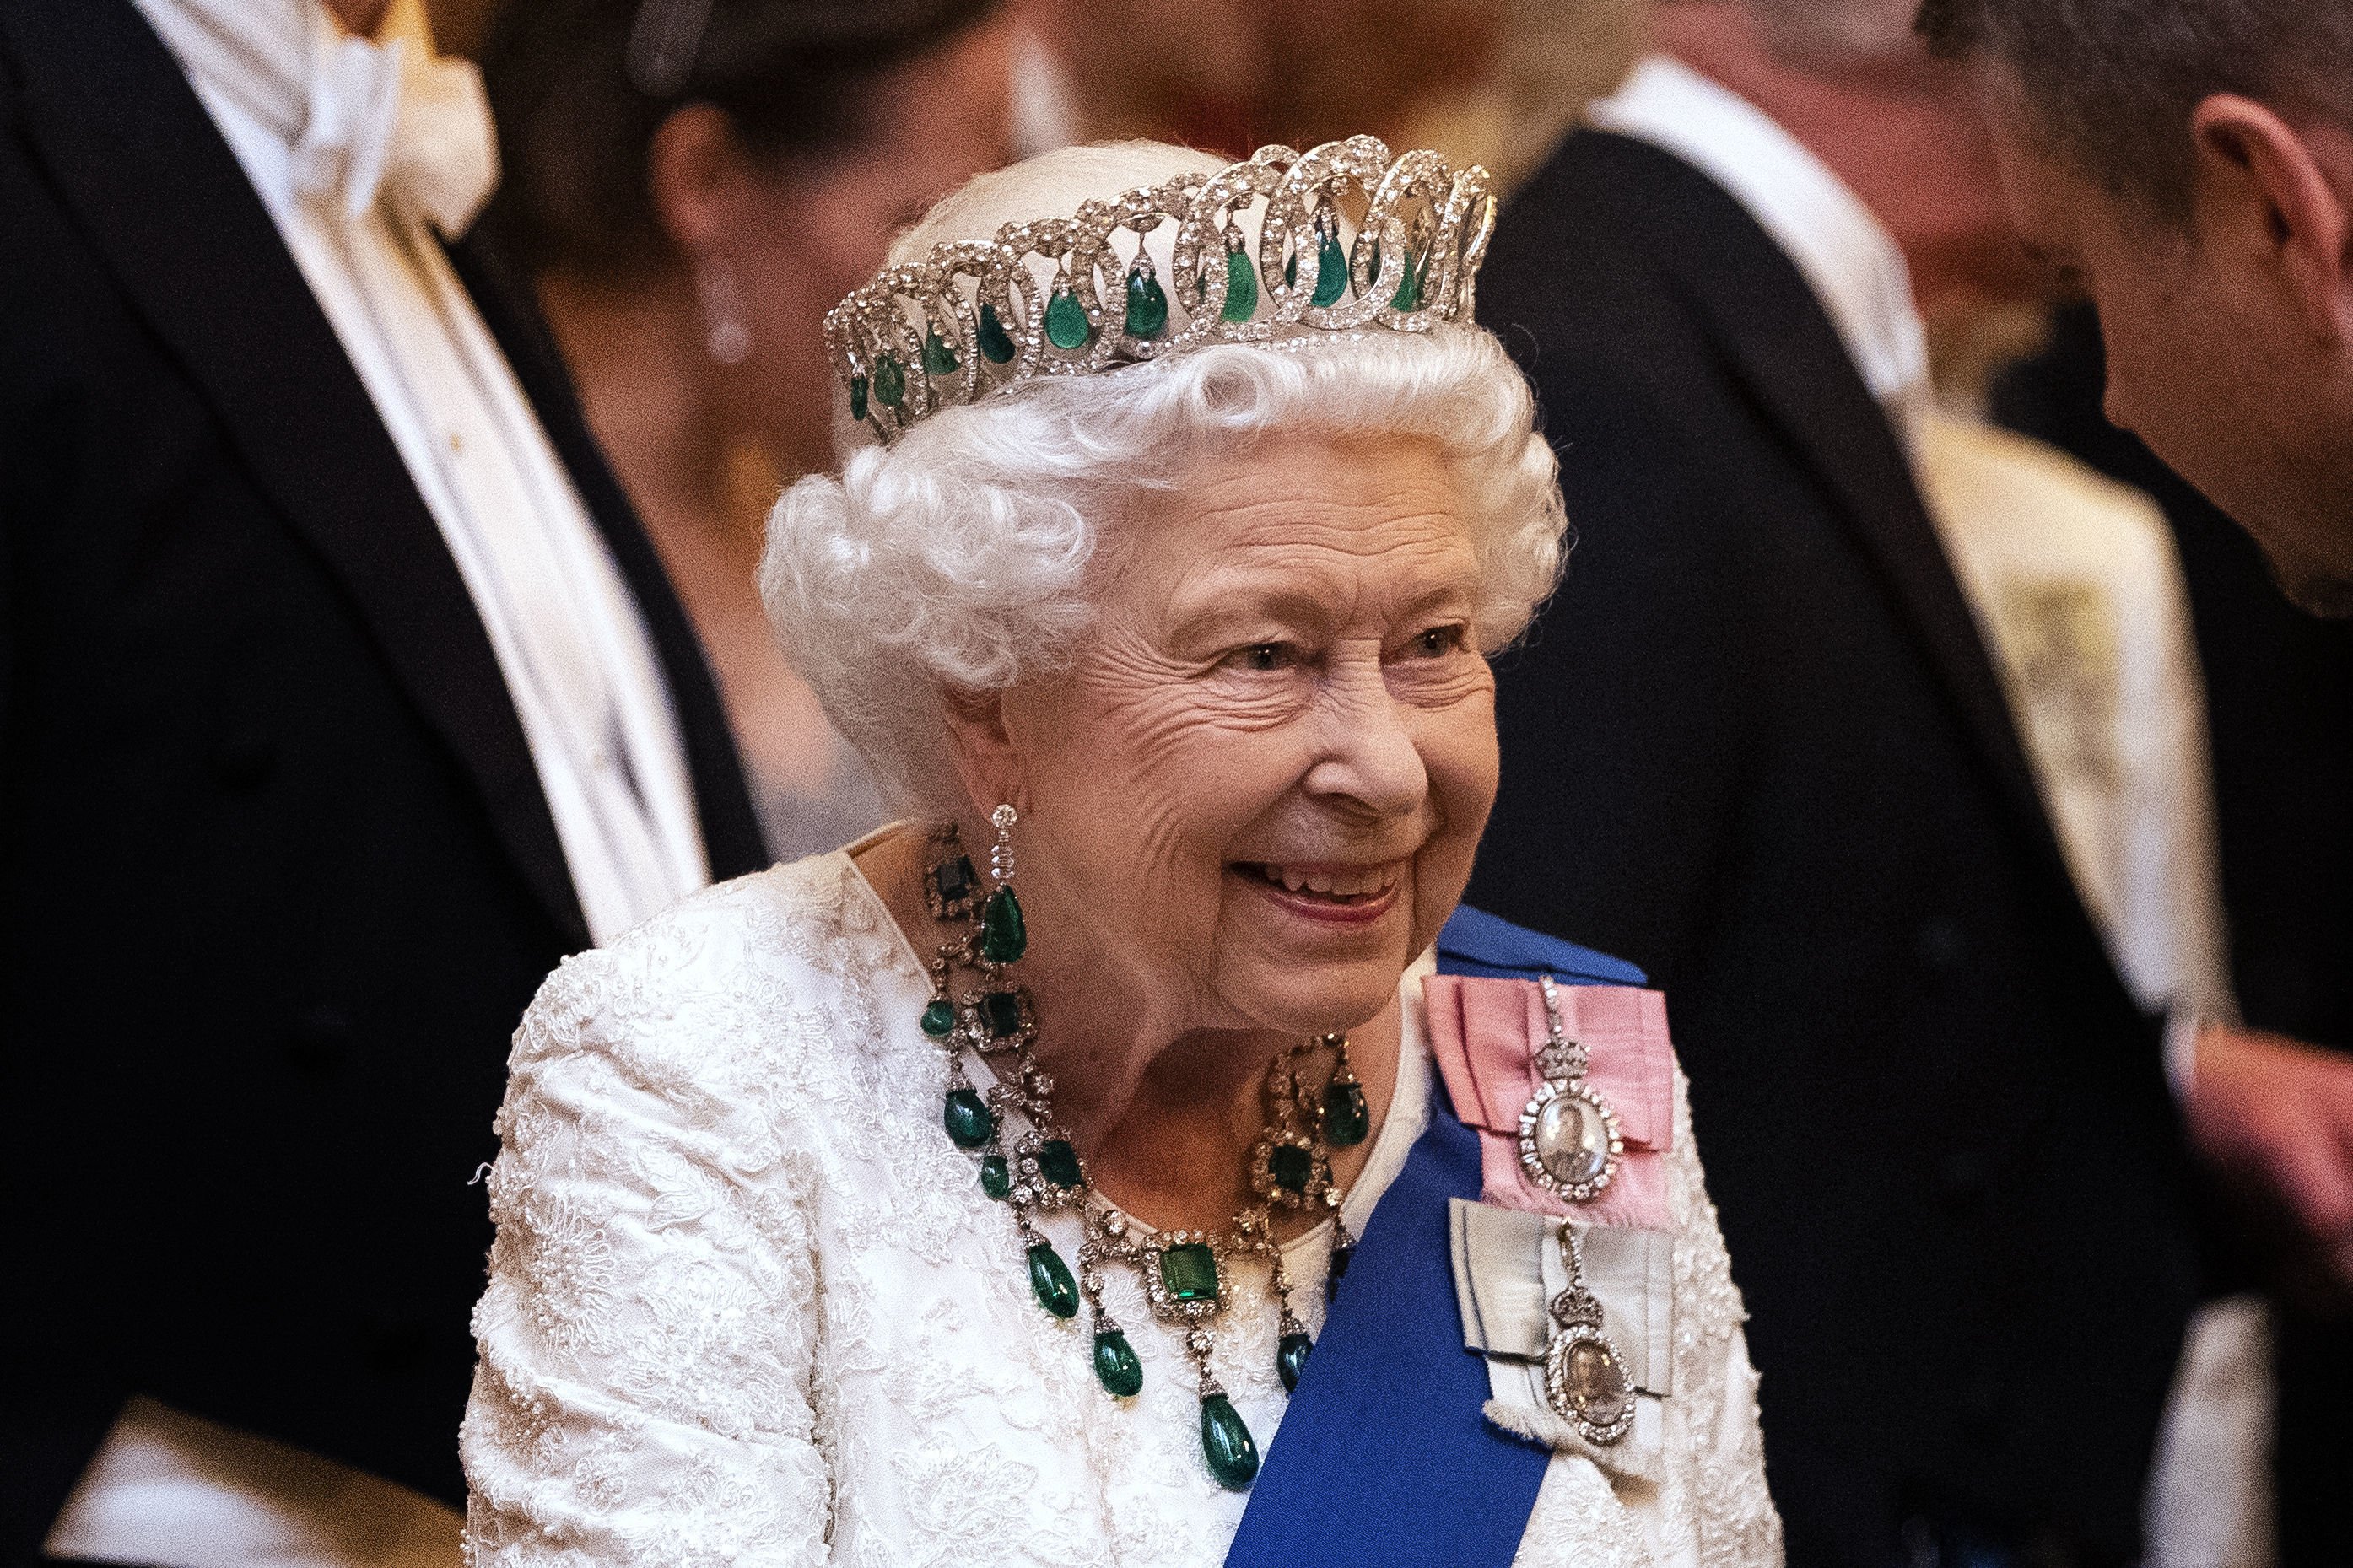 Queen Elizabeth II at an evening reception for members of the Diplomatic Corps at Buckingham Palace on December 11, 2019 in London, England.  |  Source: Getty Images